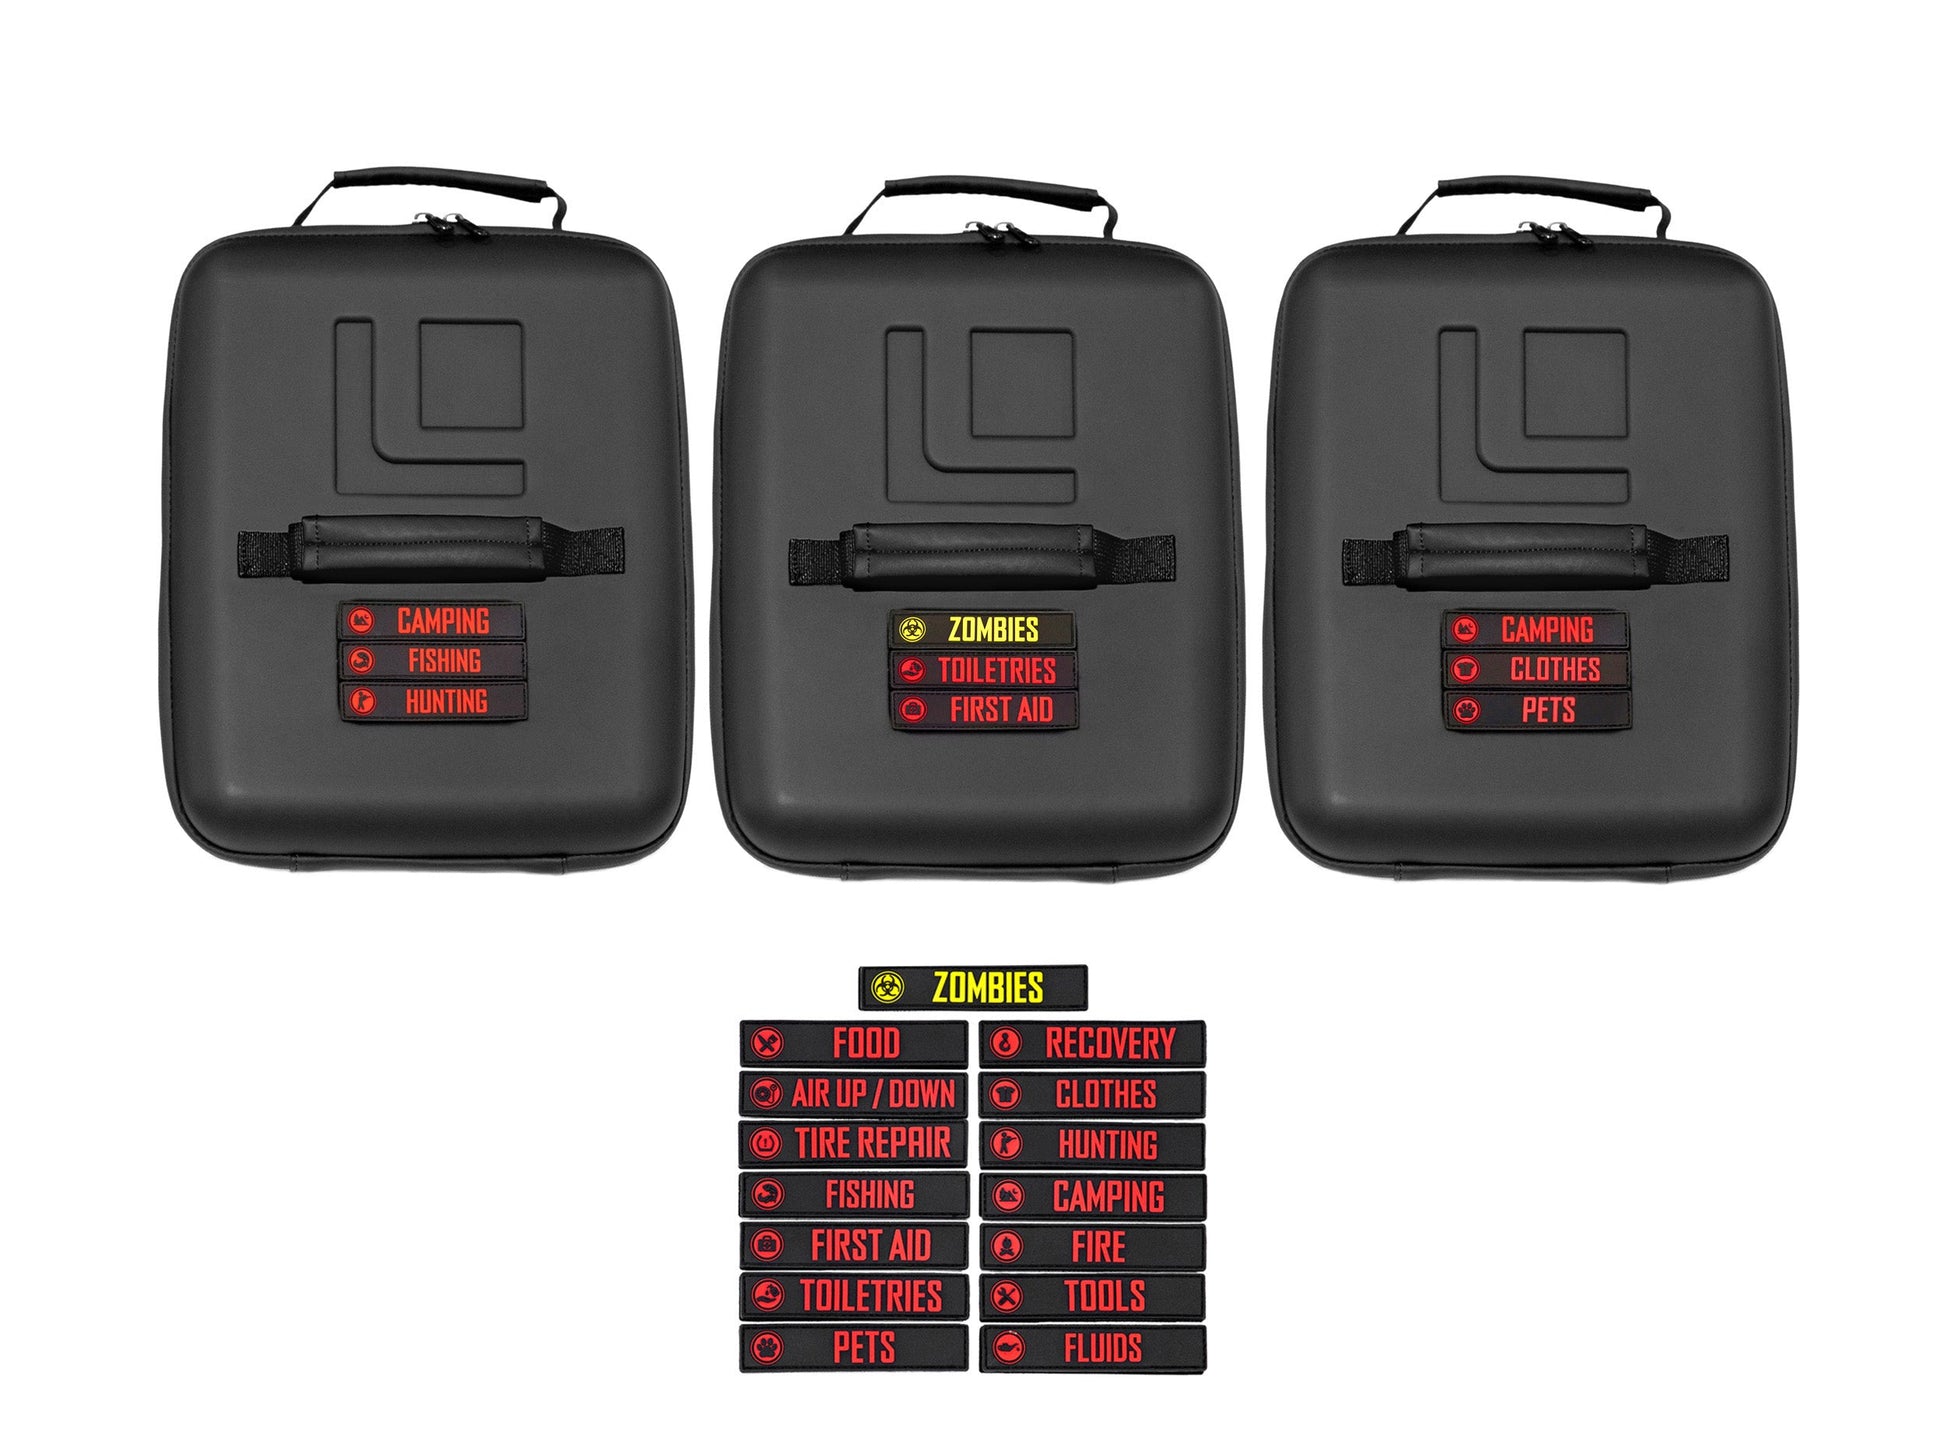 GearBAG 3 PACK + PATCH Kit-Offroad Scout